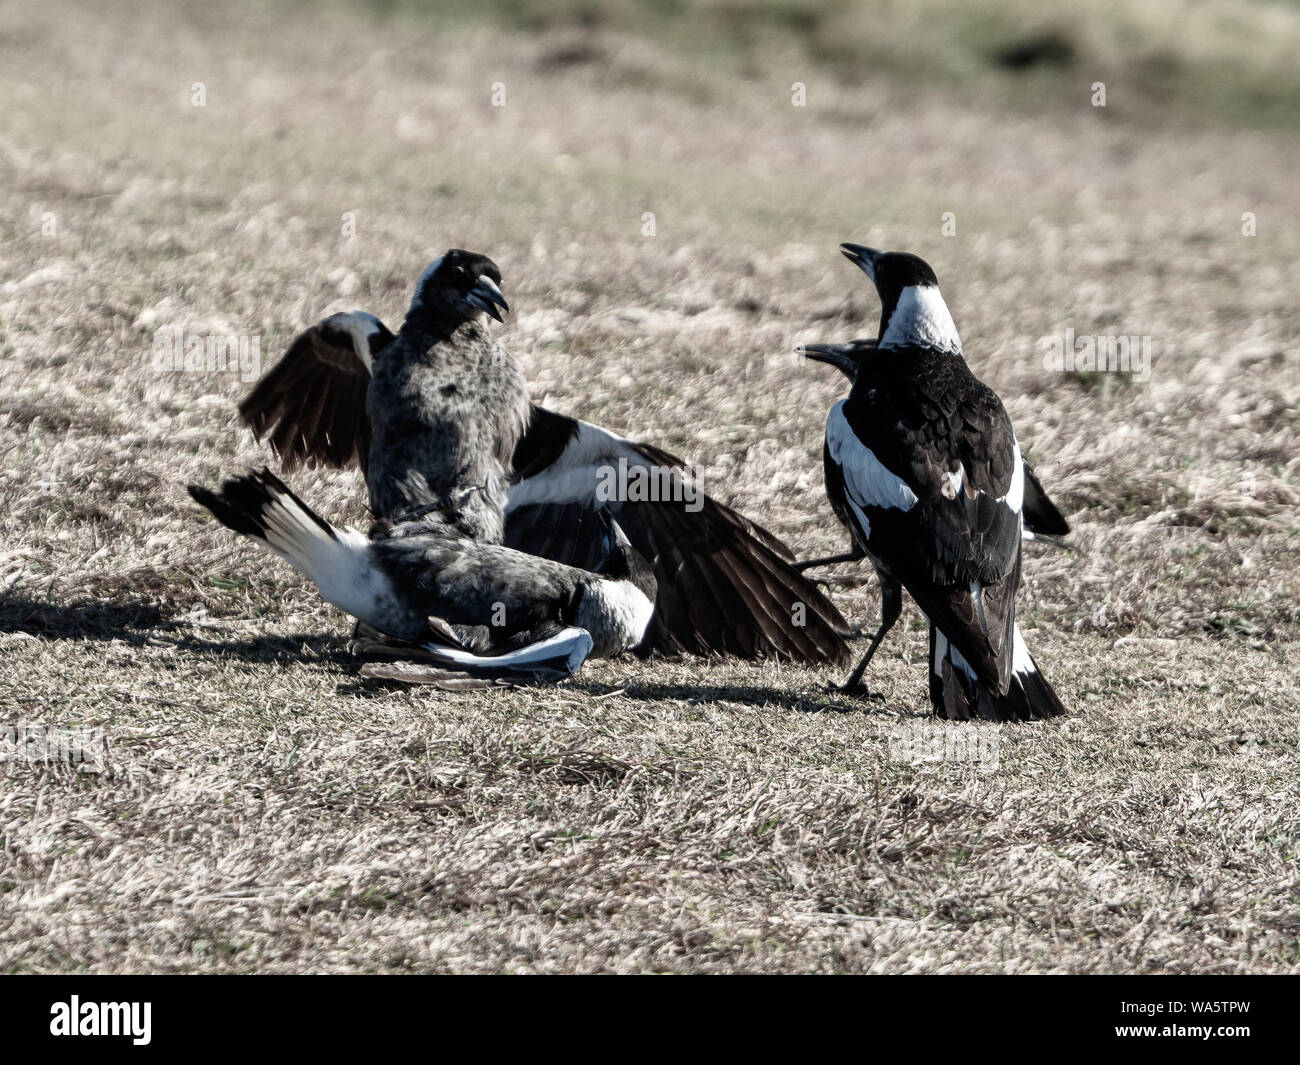 Australian Magpies, Birds.Young black and white feathered Magpies Play fighting in the dry grass. Flapping their wings Stock Photo